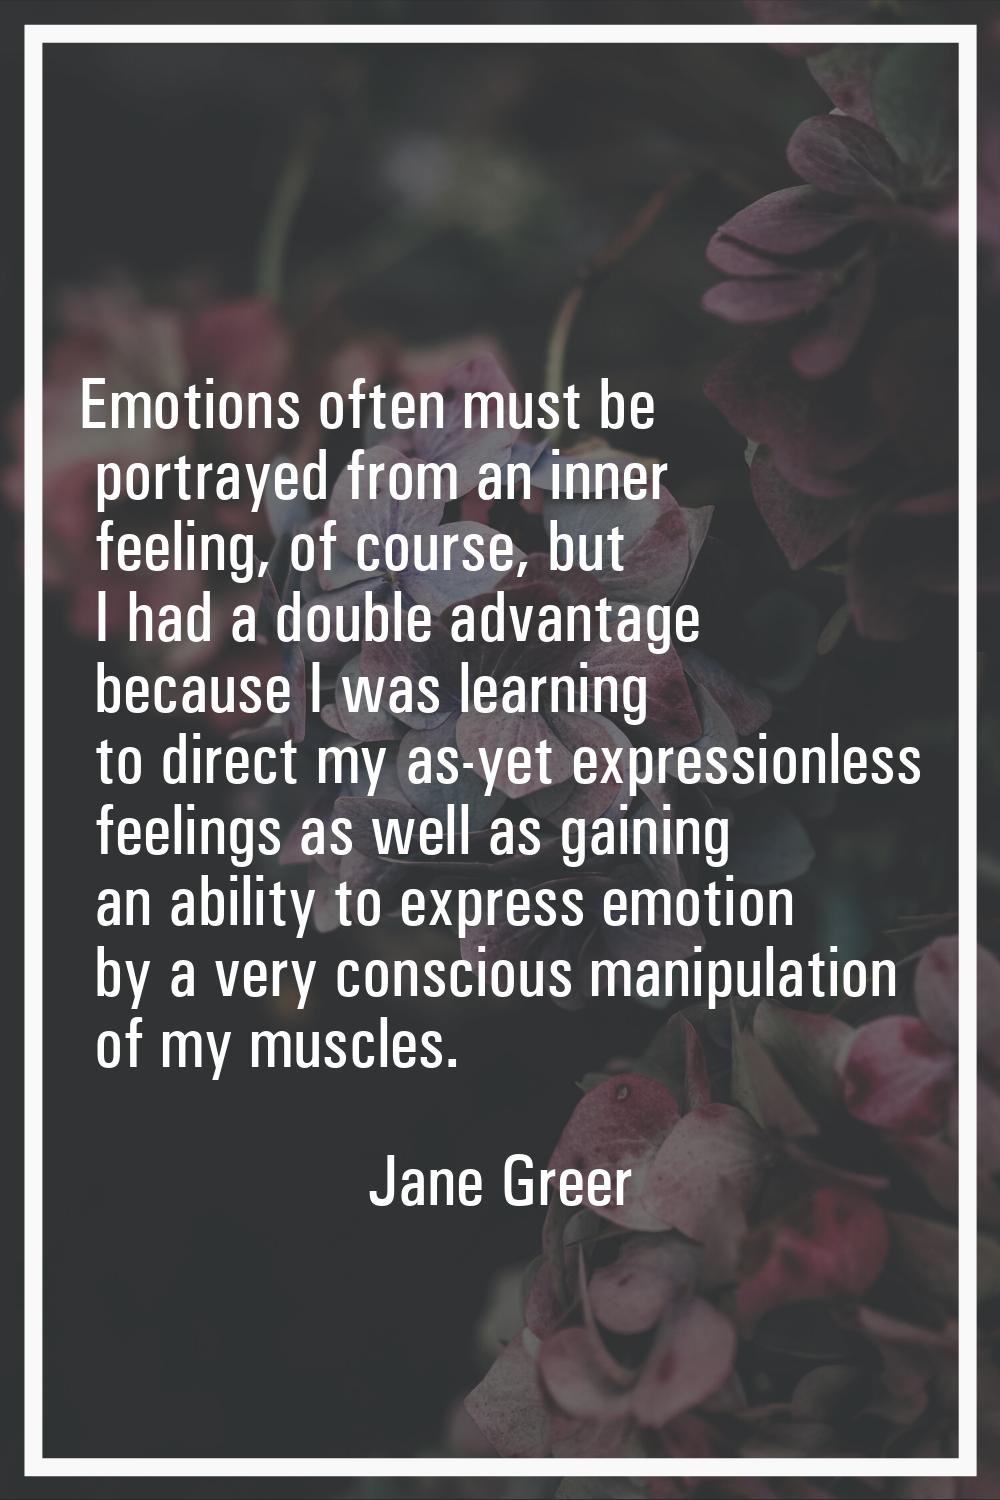 Emotions often must be portrayed from an inner feeling, of course, but I had a double advantage bec